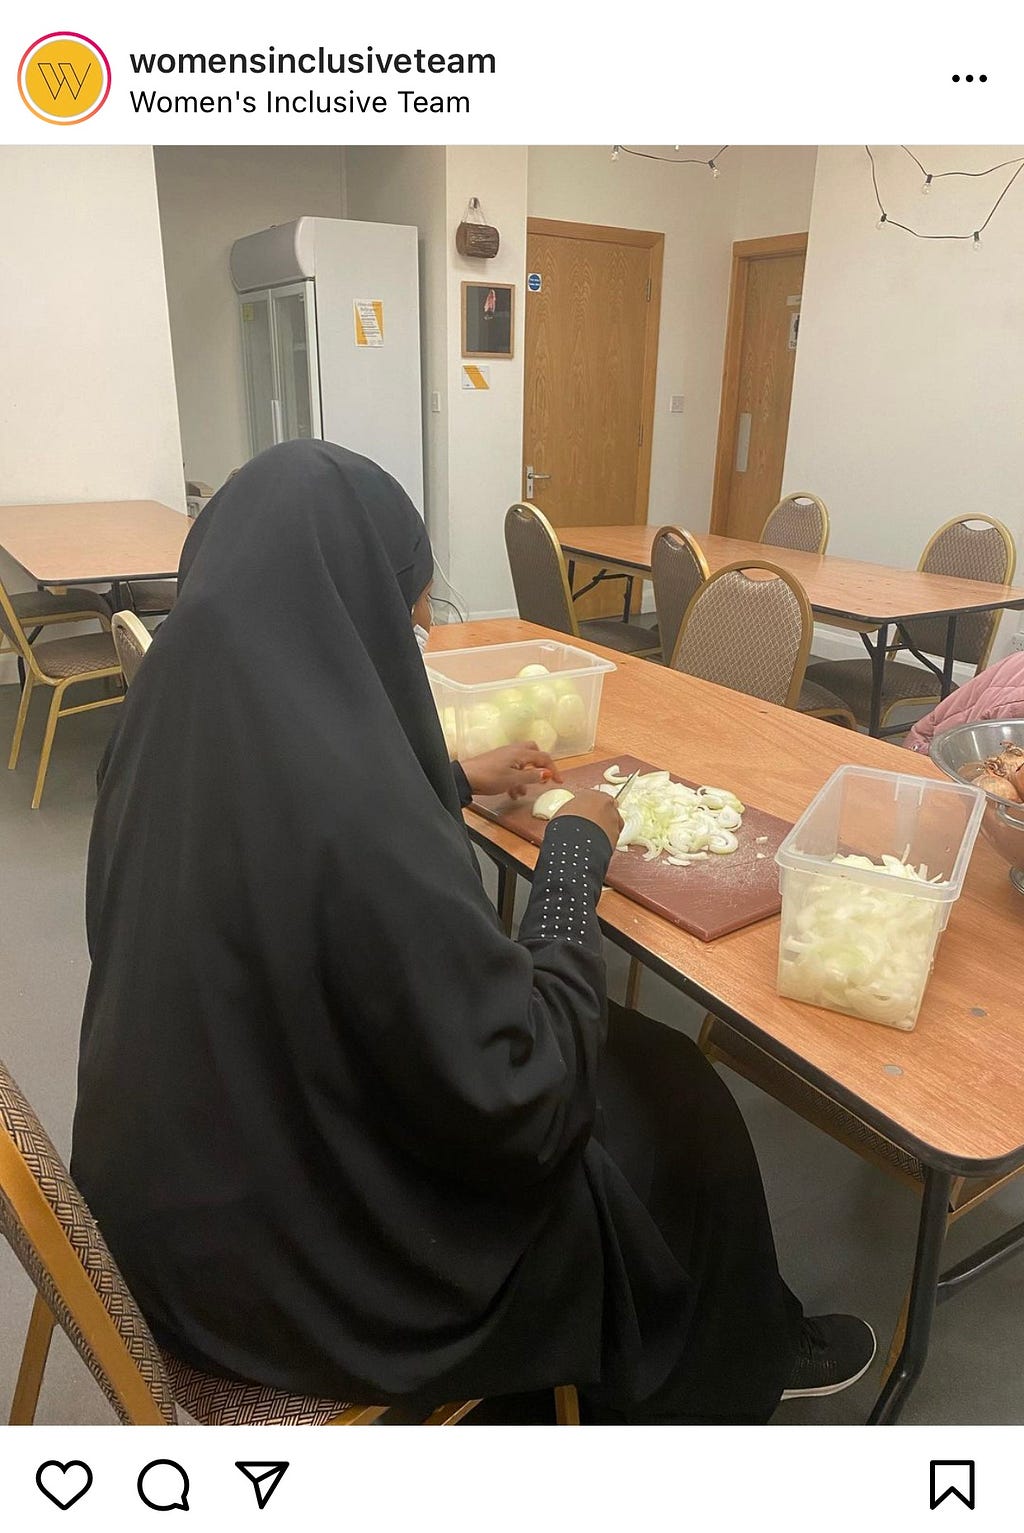 A woman volunteer is pictured chopping onions for the Hooyo East Takeaway service which supports the Women’s Inclusive Team.